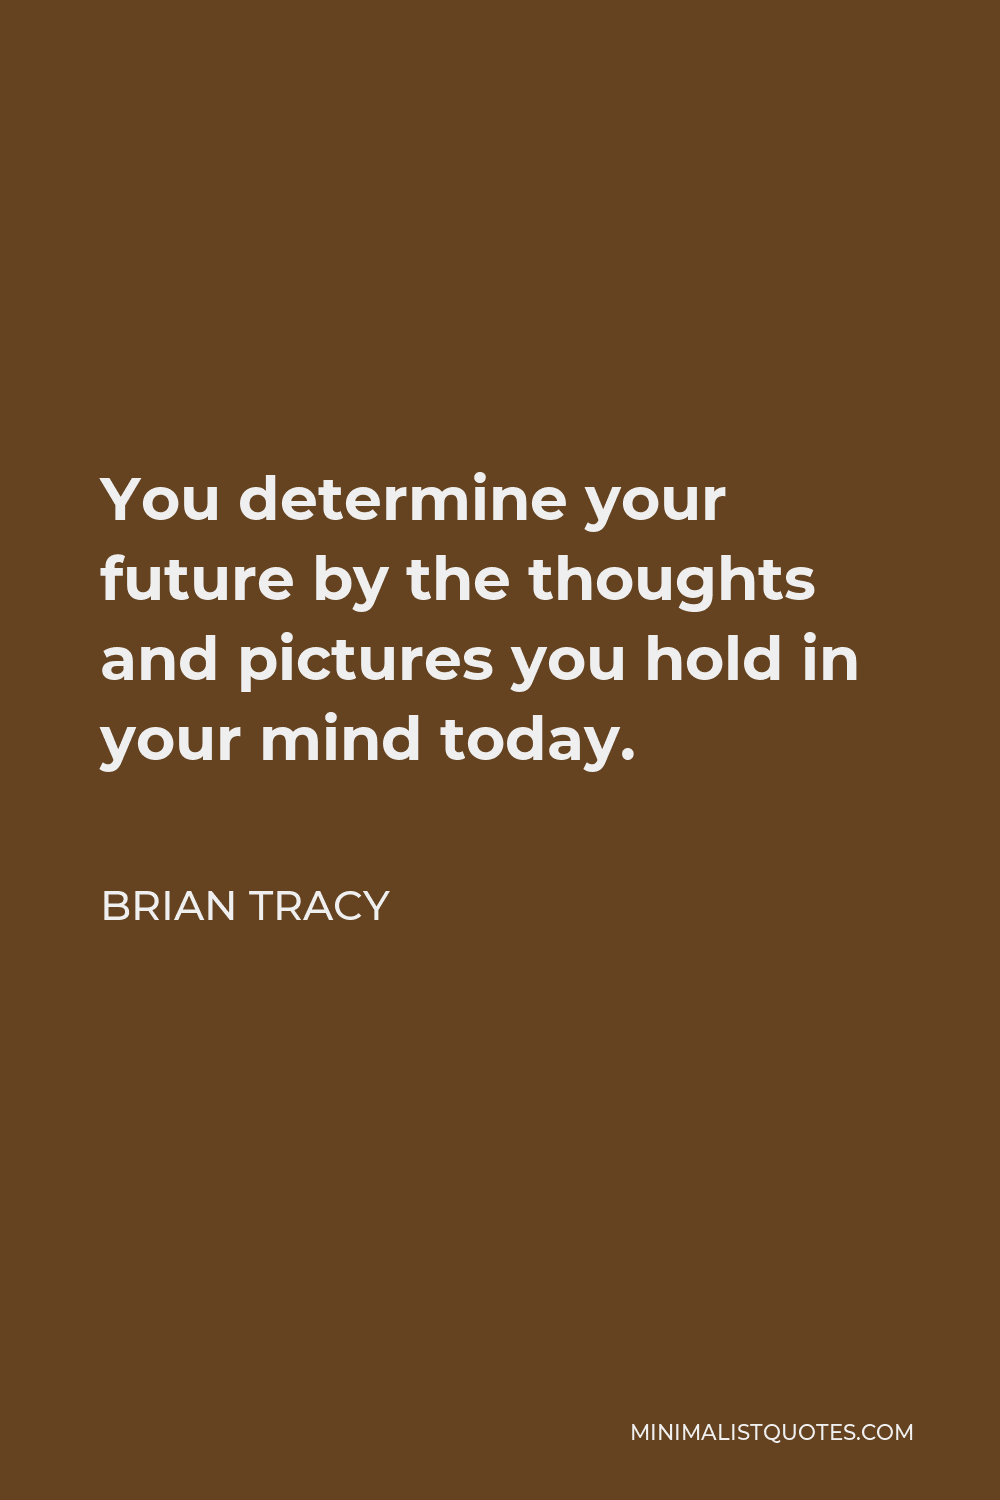 Brian Tracy Quote - You determine your future by the thoughts and pictures you hold in your mind today.